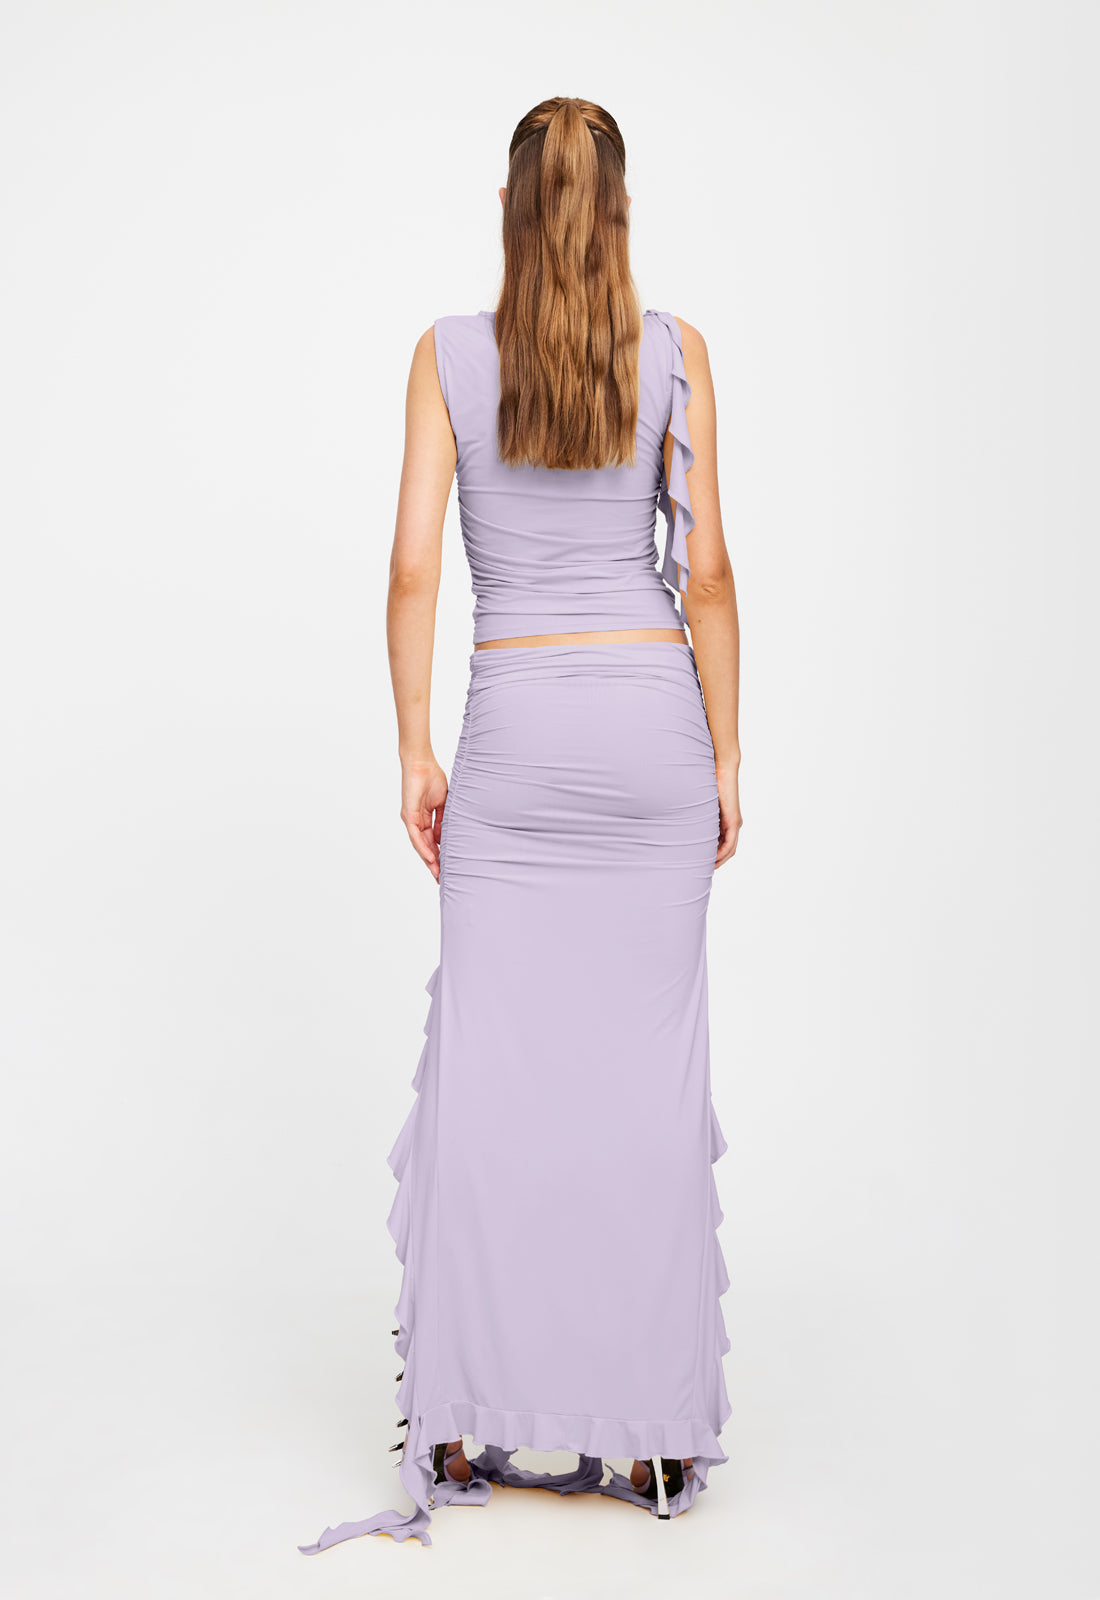 RENDEZVOUS SKIRT - LILAC